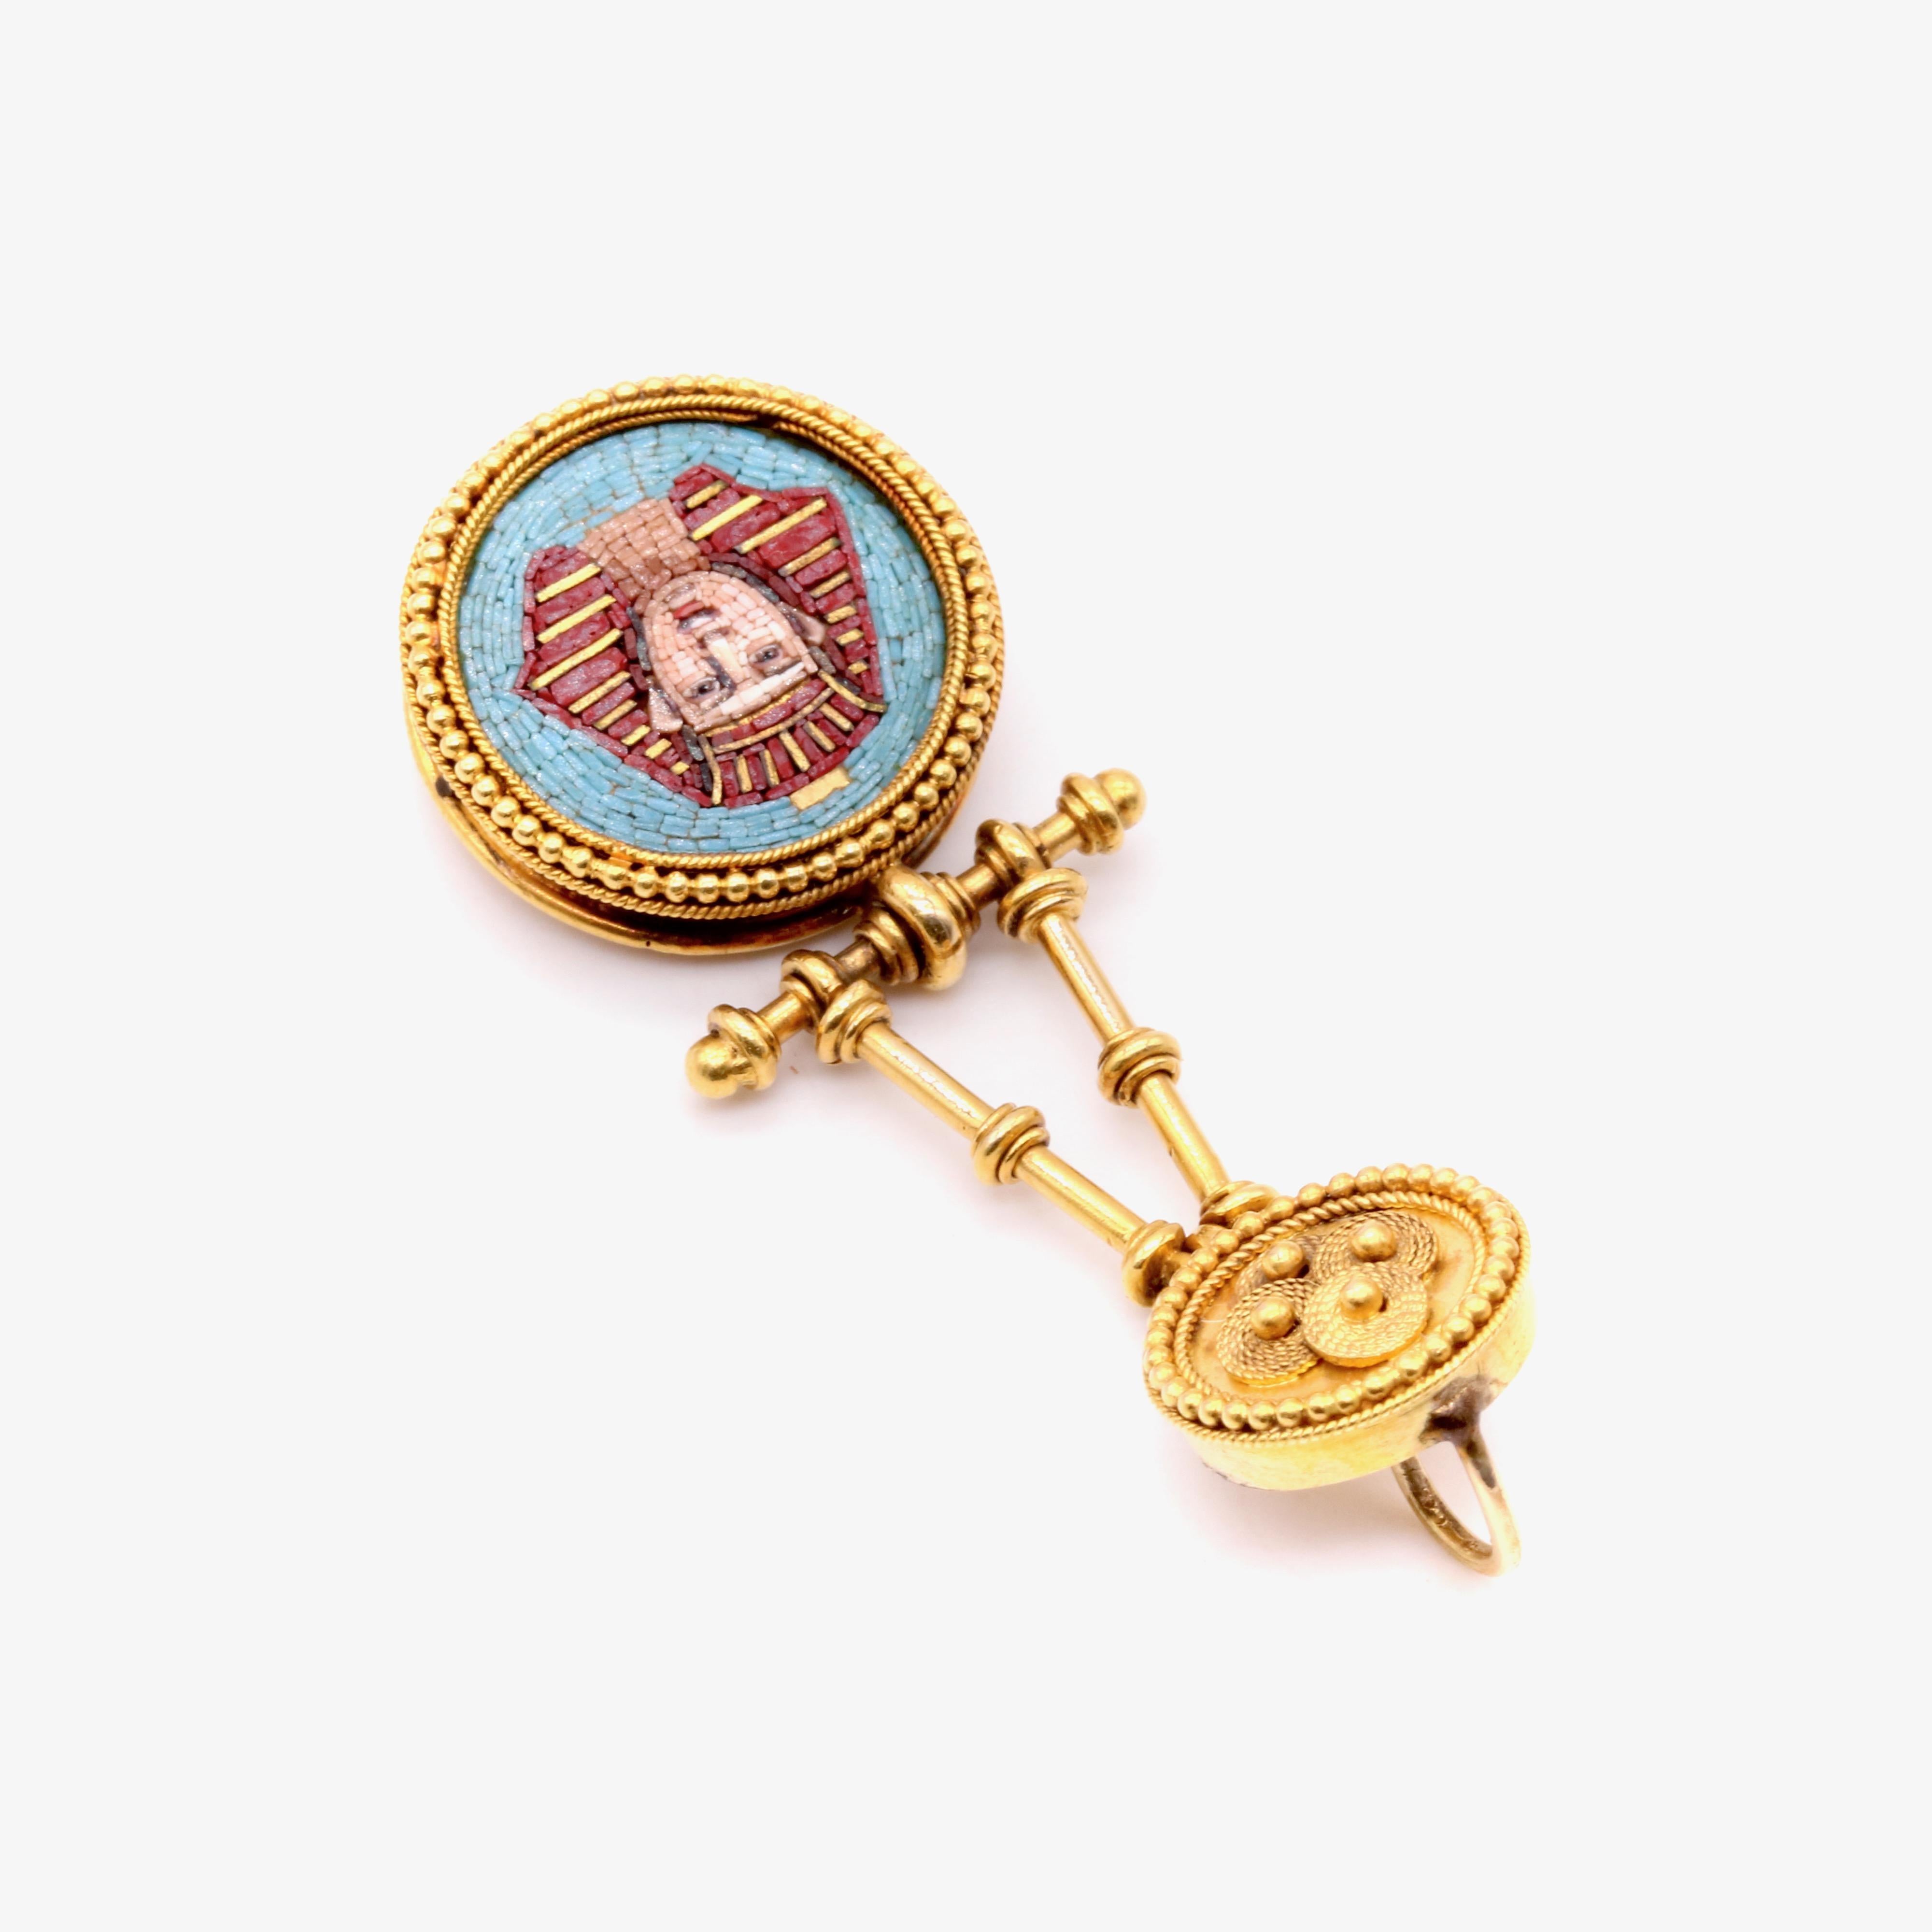 Antique Victorian 1870s 18K Gold Egyptian Revival Pharaoh Micro Mosaic Pendant For Sale 4